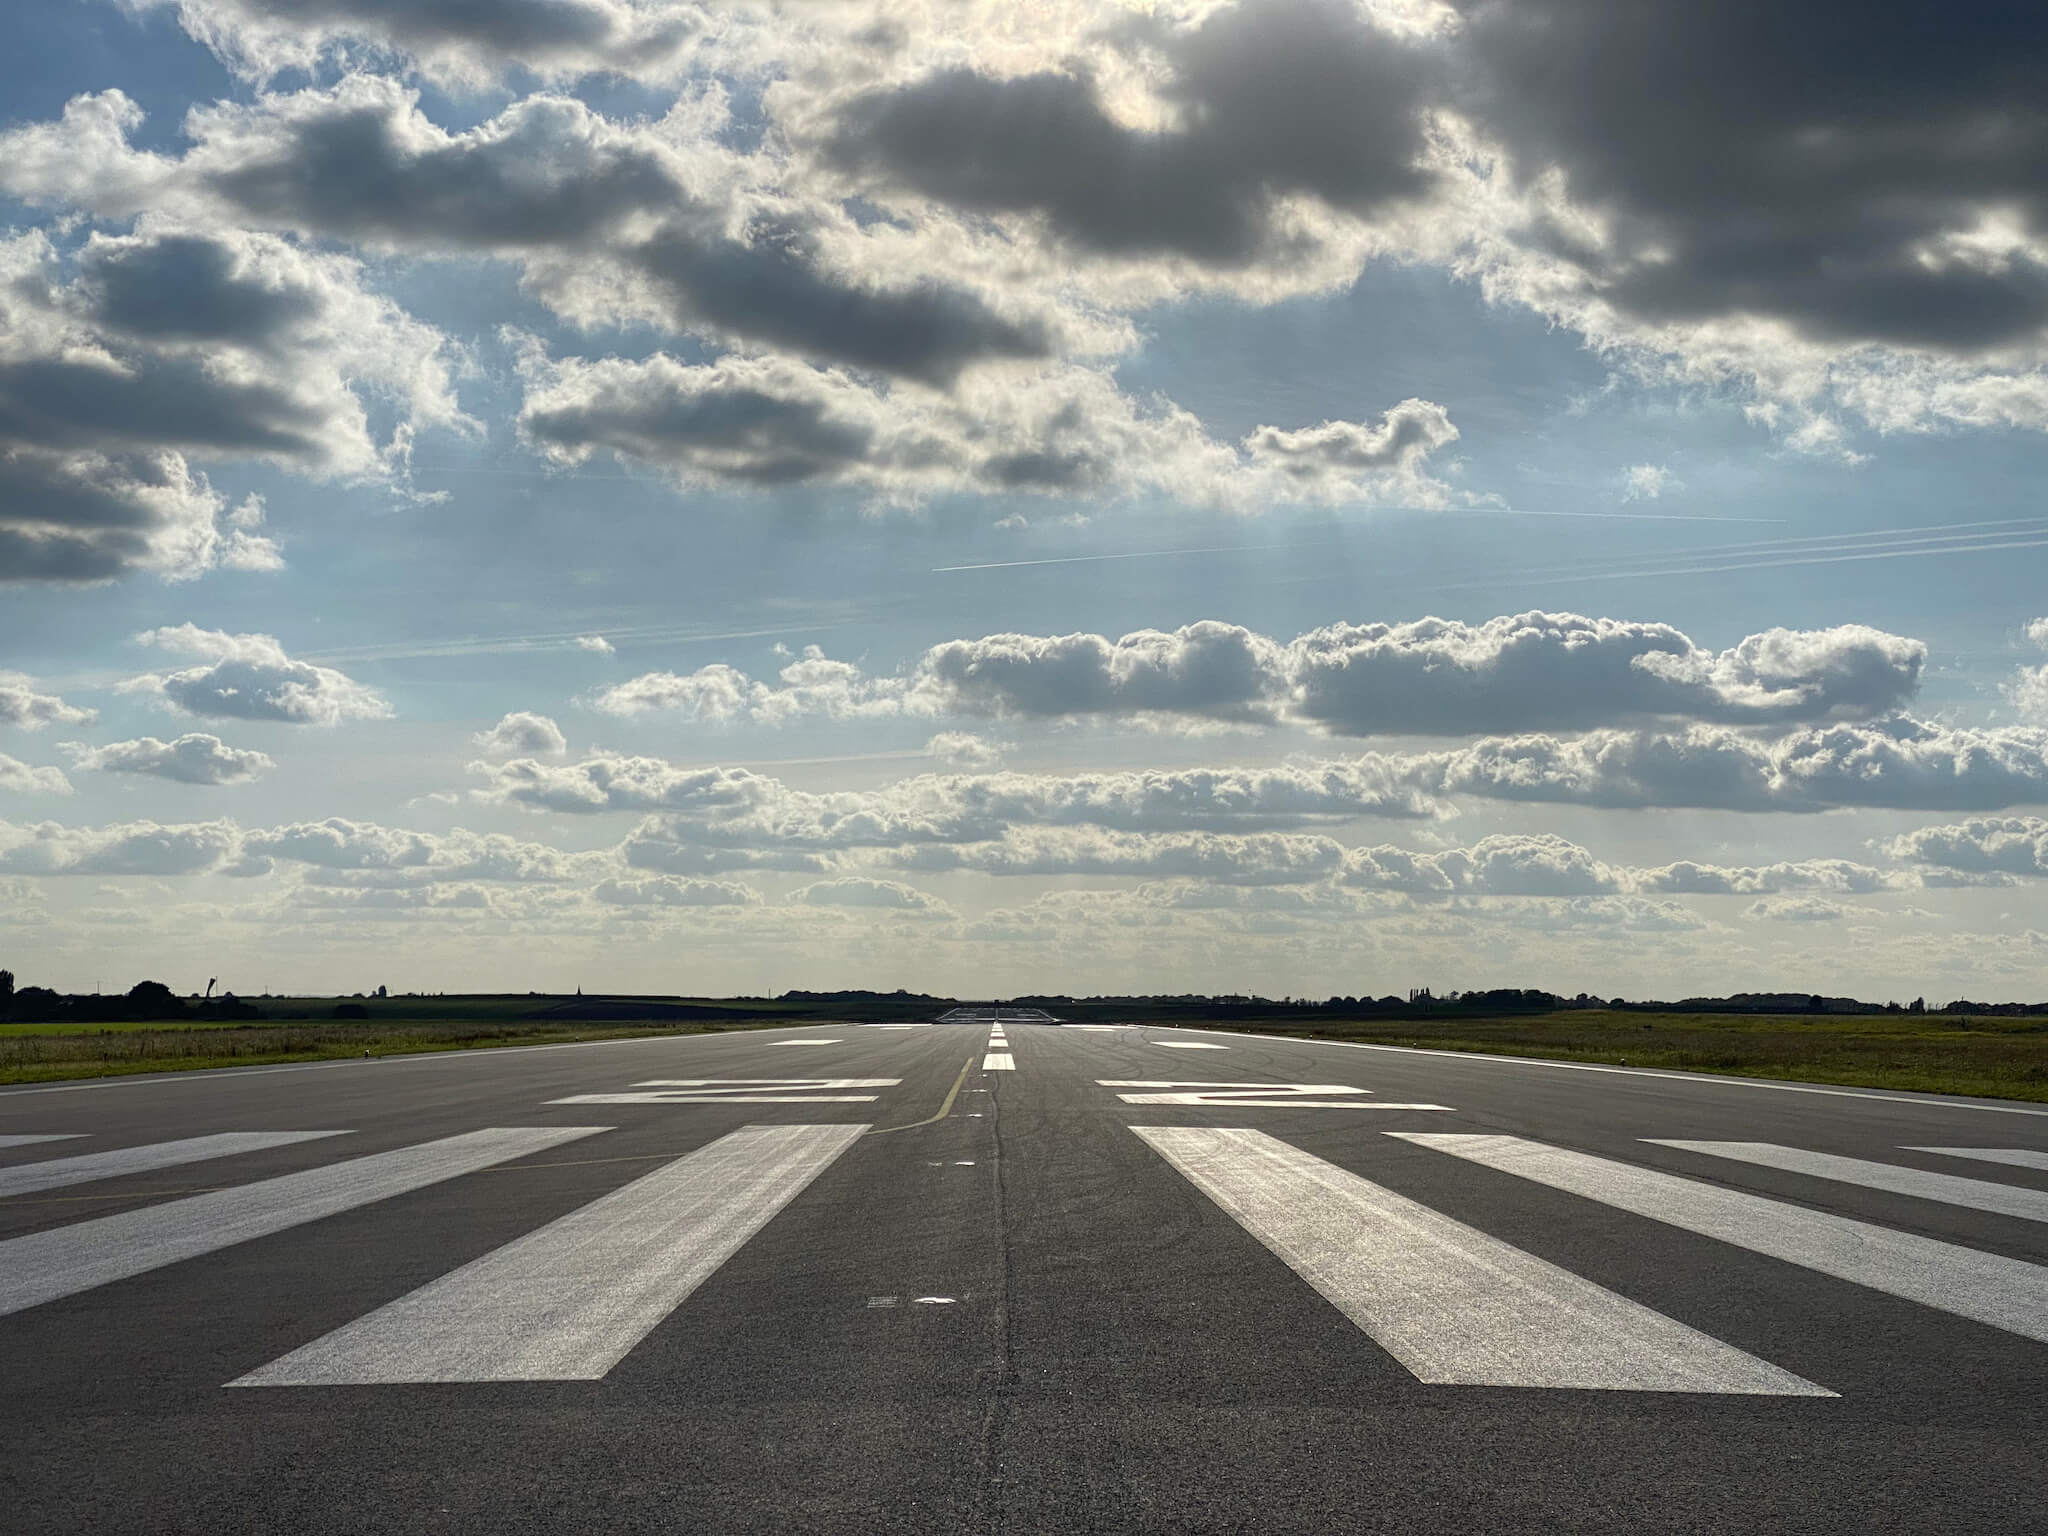 Runway 22 in Rouen under blue sky with scattered clouds during daytime